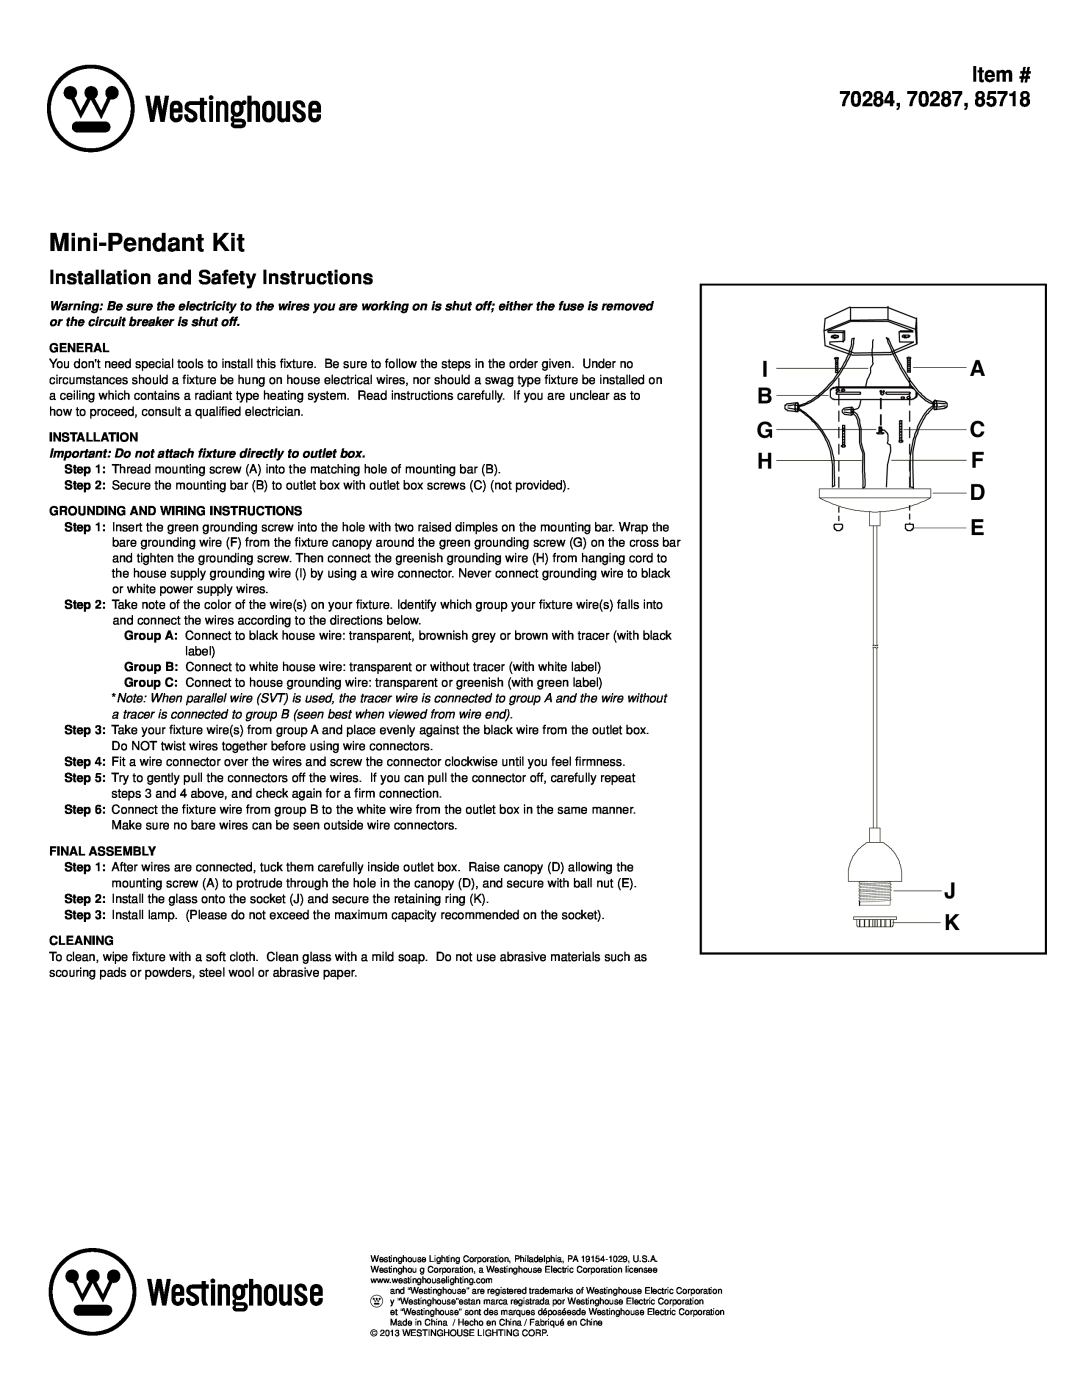 Westinghouse 70287, 85718 manual Mini-Pendant Kit, Installation and Safety Instructions, Item #, I A B 